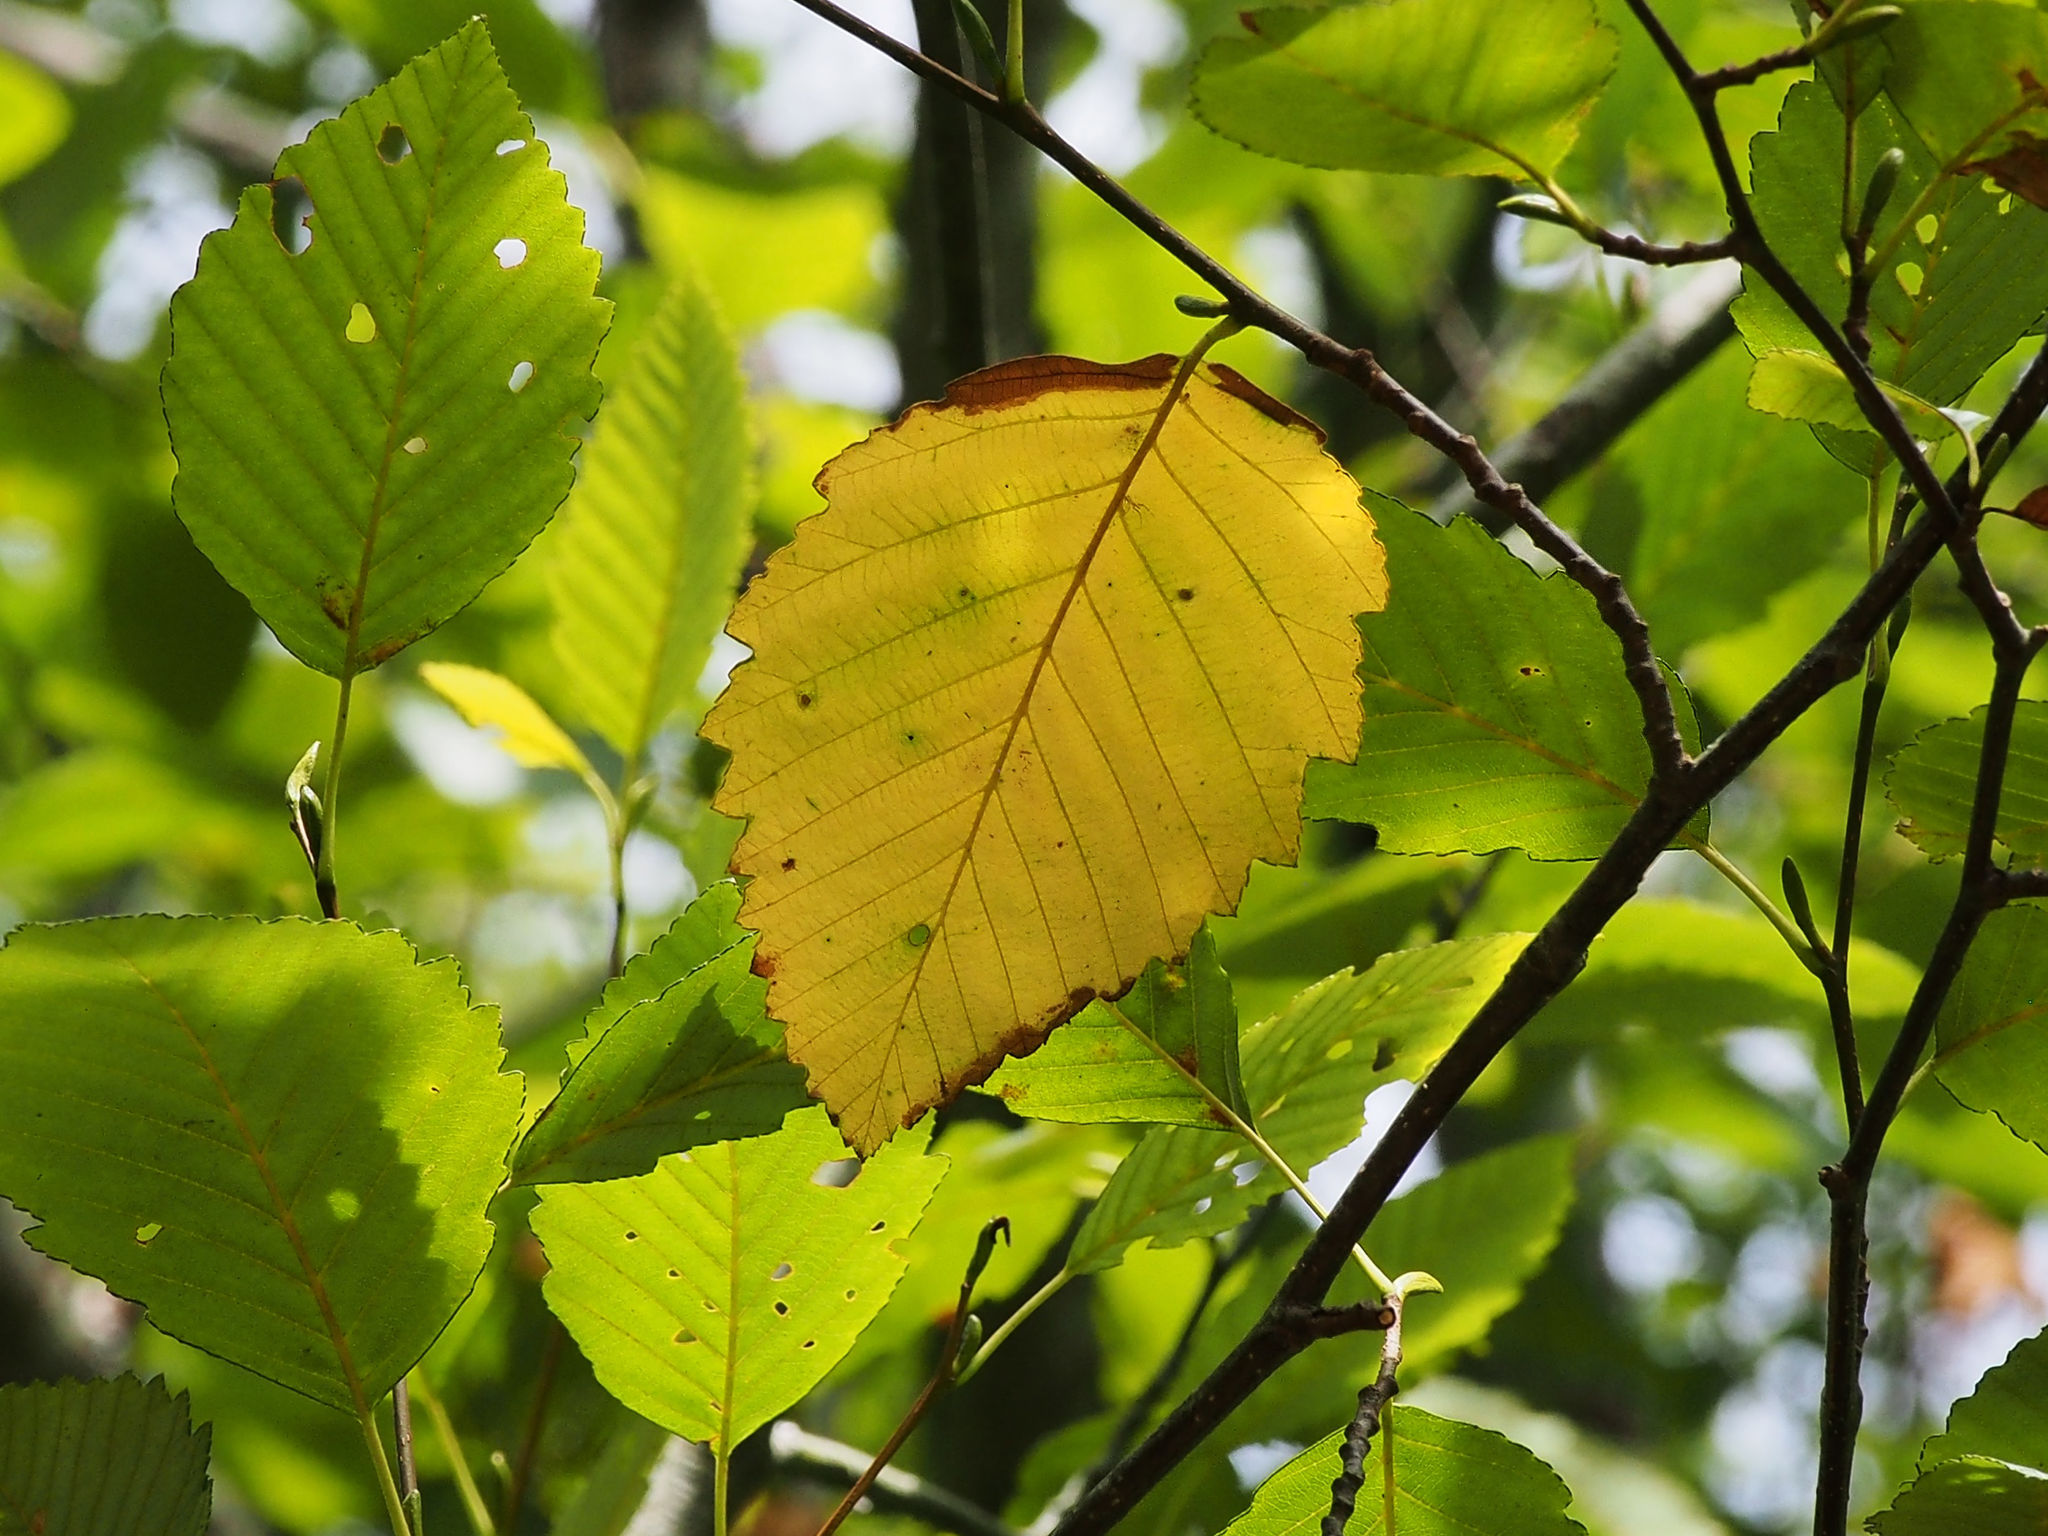 When the Leaf Falls – Nature's Depths